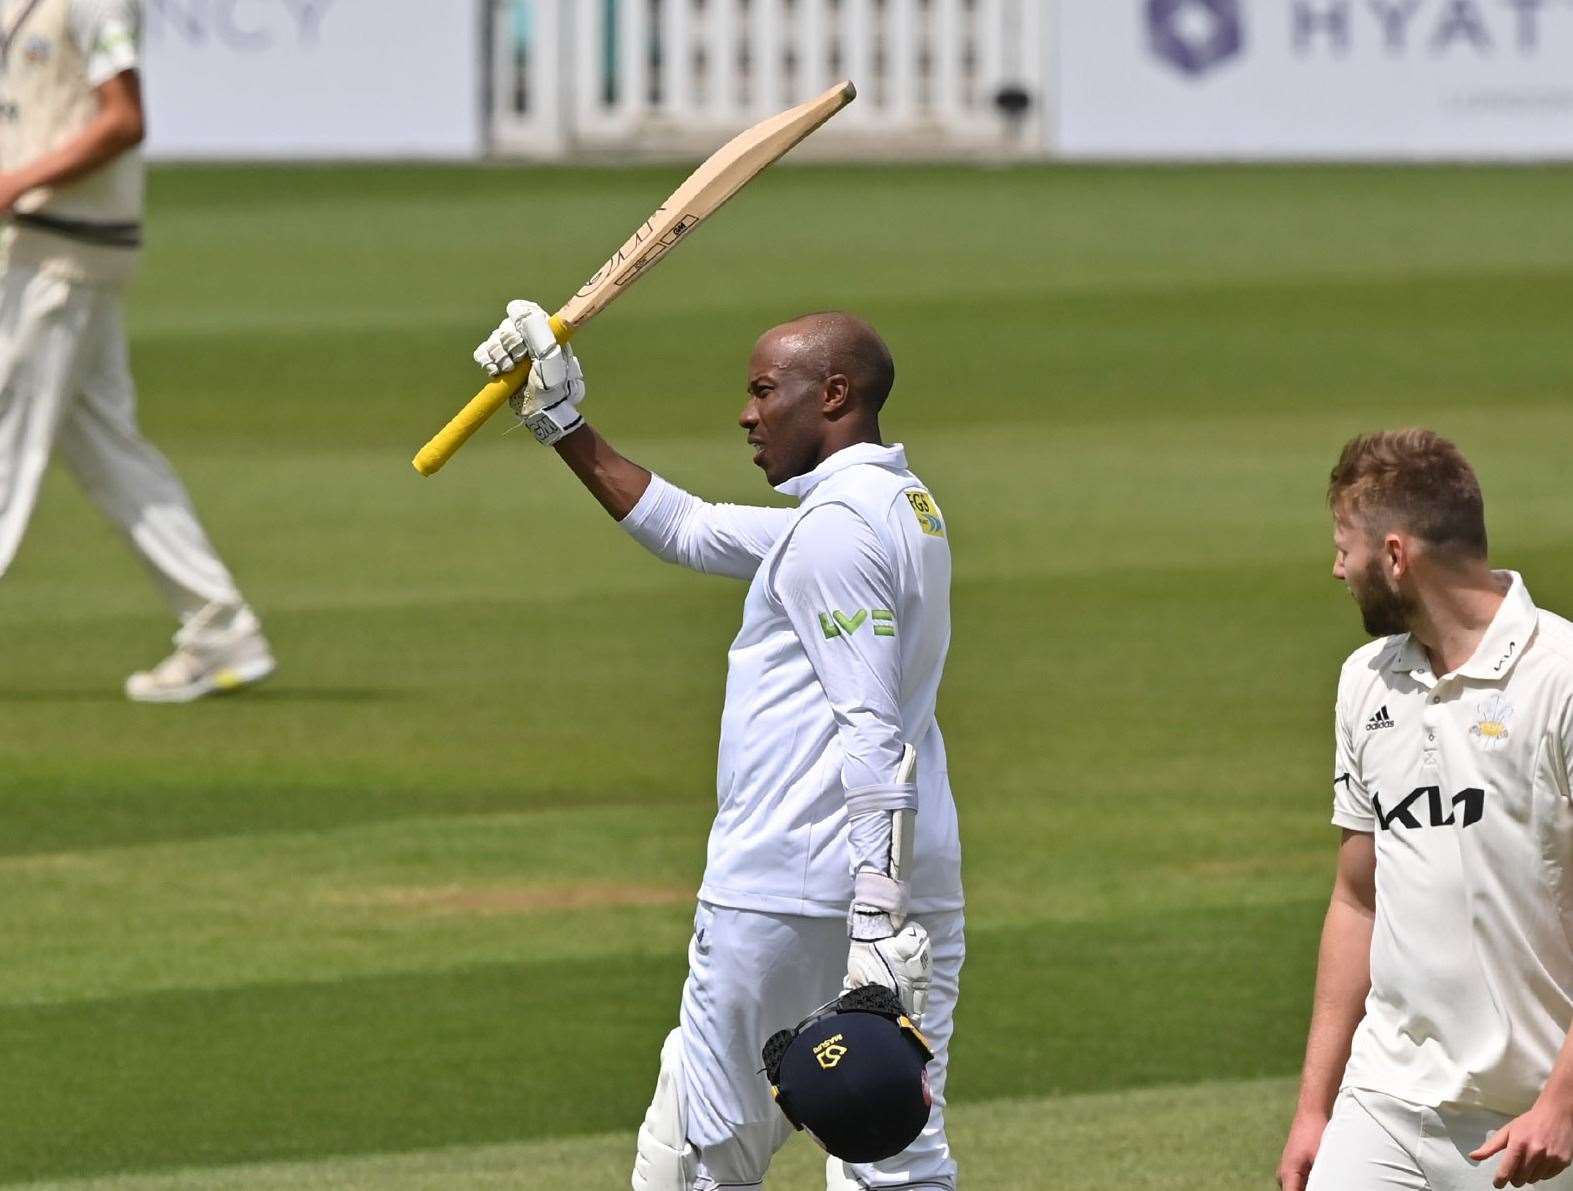 Kent's Daniel Bell-Drummond scored a first-innings century as his side battled to try and salvage a draw against Surrey. Picture: Keith Gillard